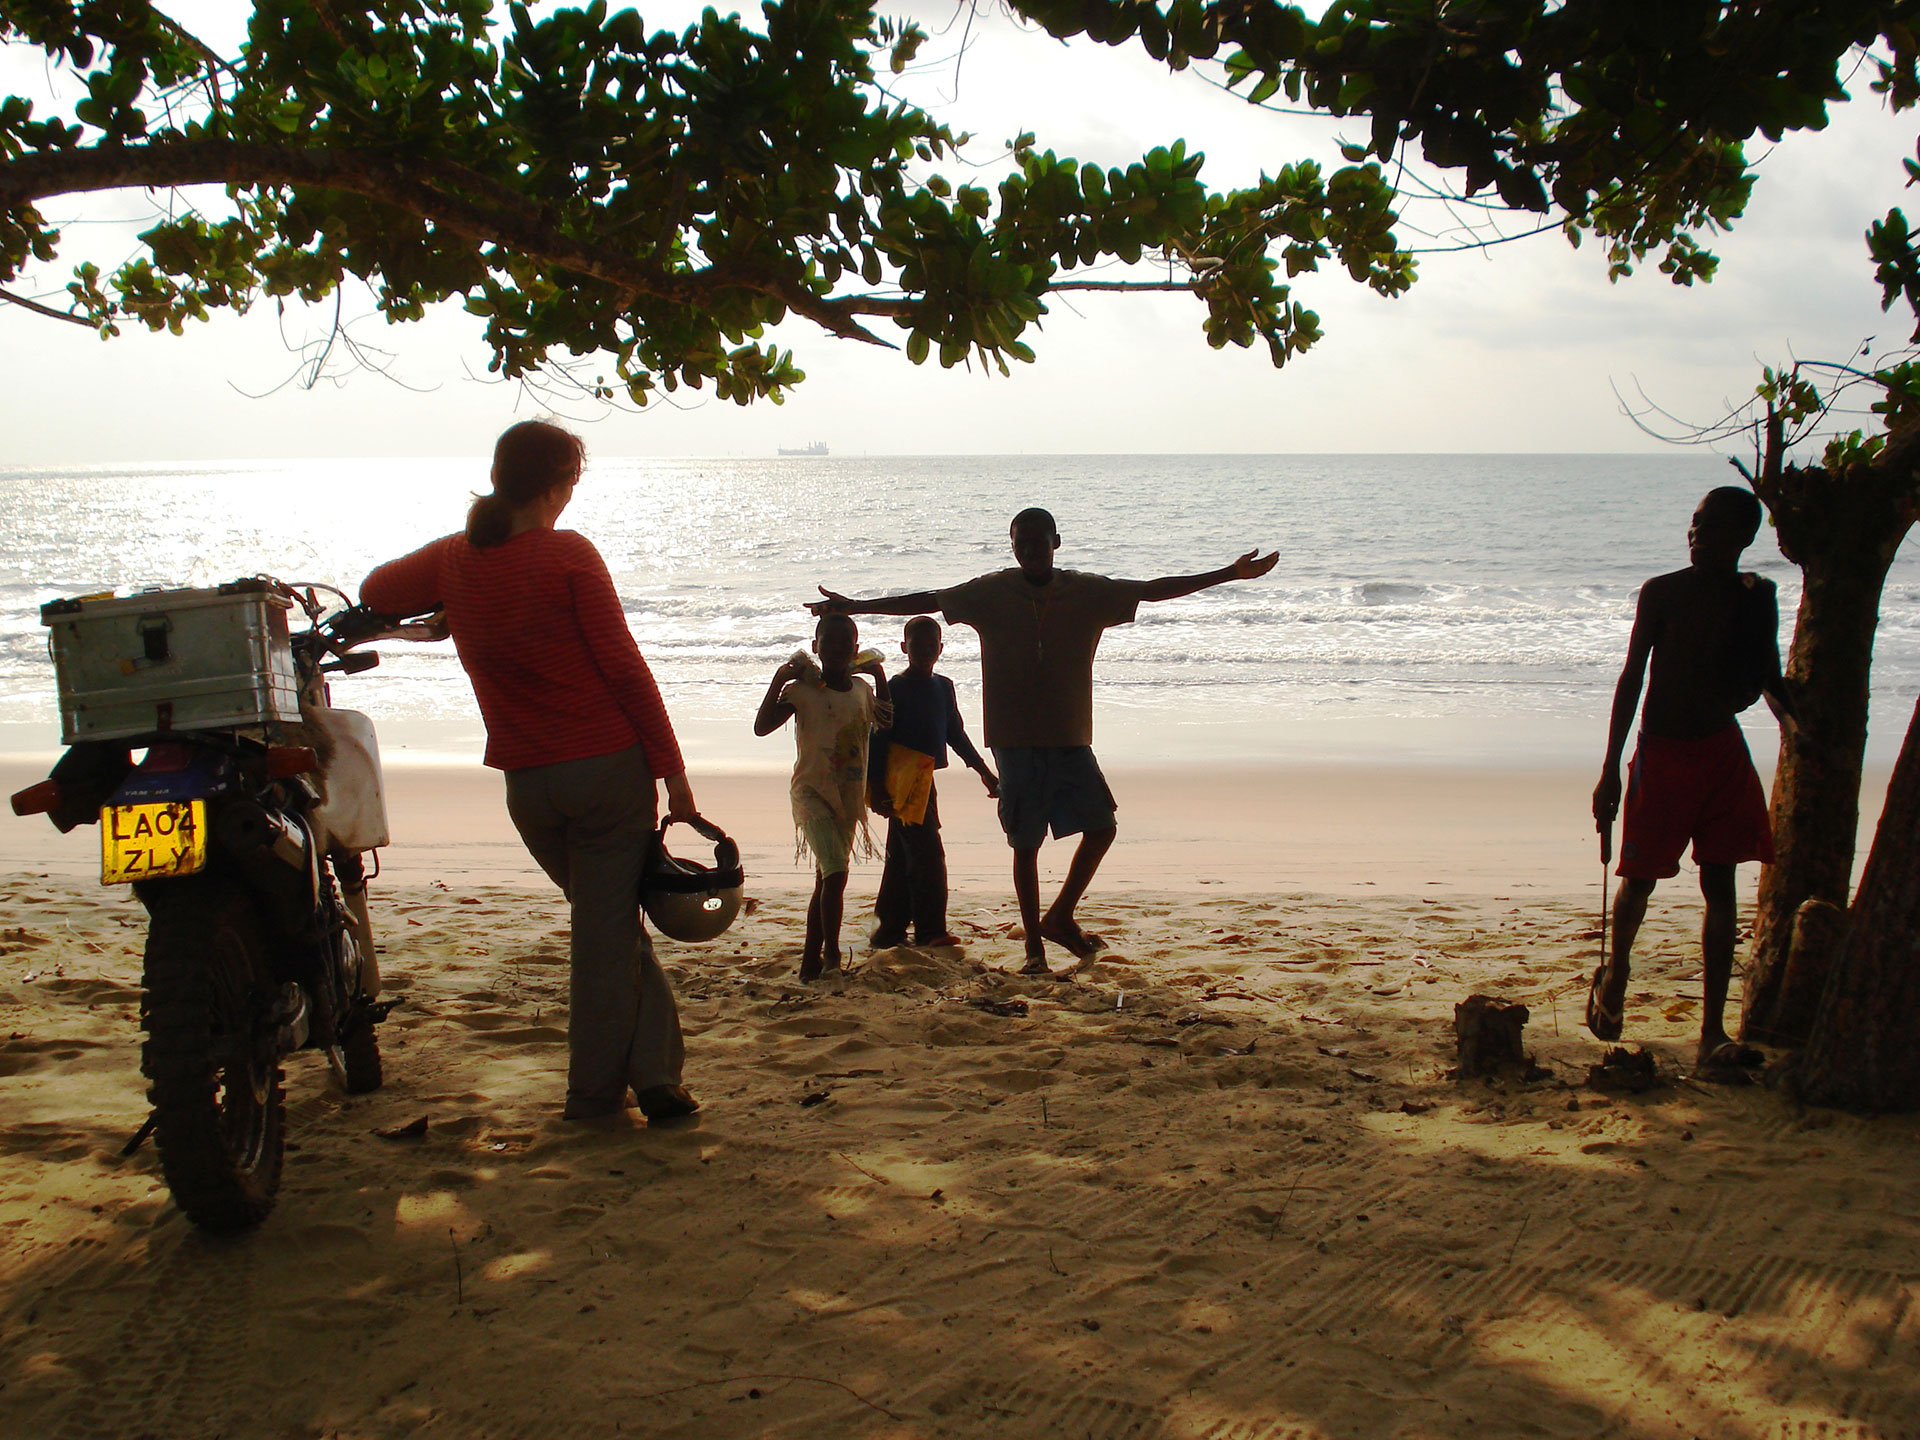 Adventure author Lois Pryce with her motorbike on the beach in Cameroon talking to a group of people